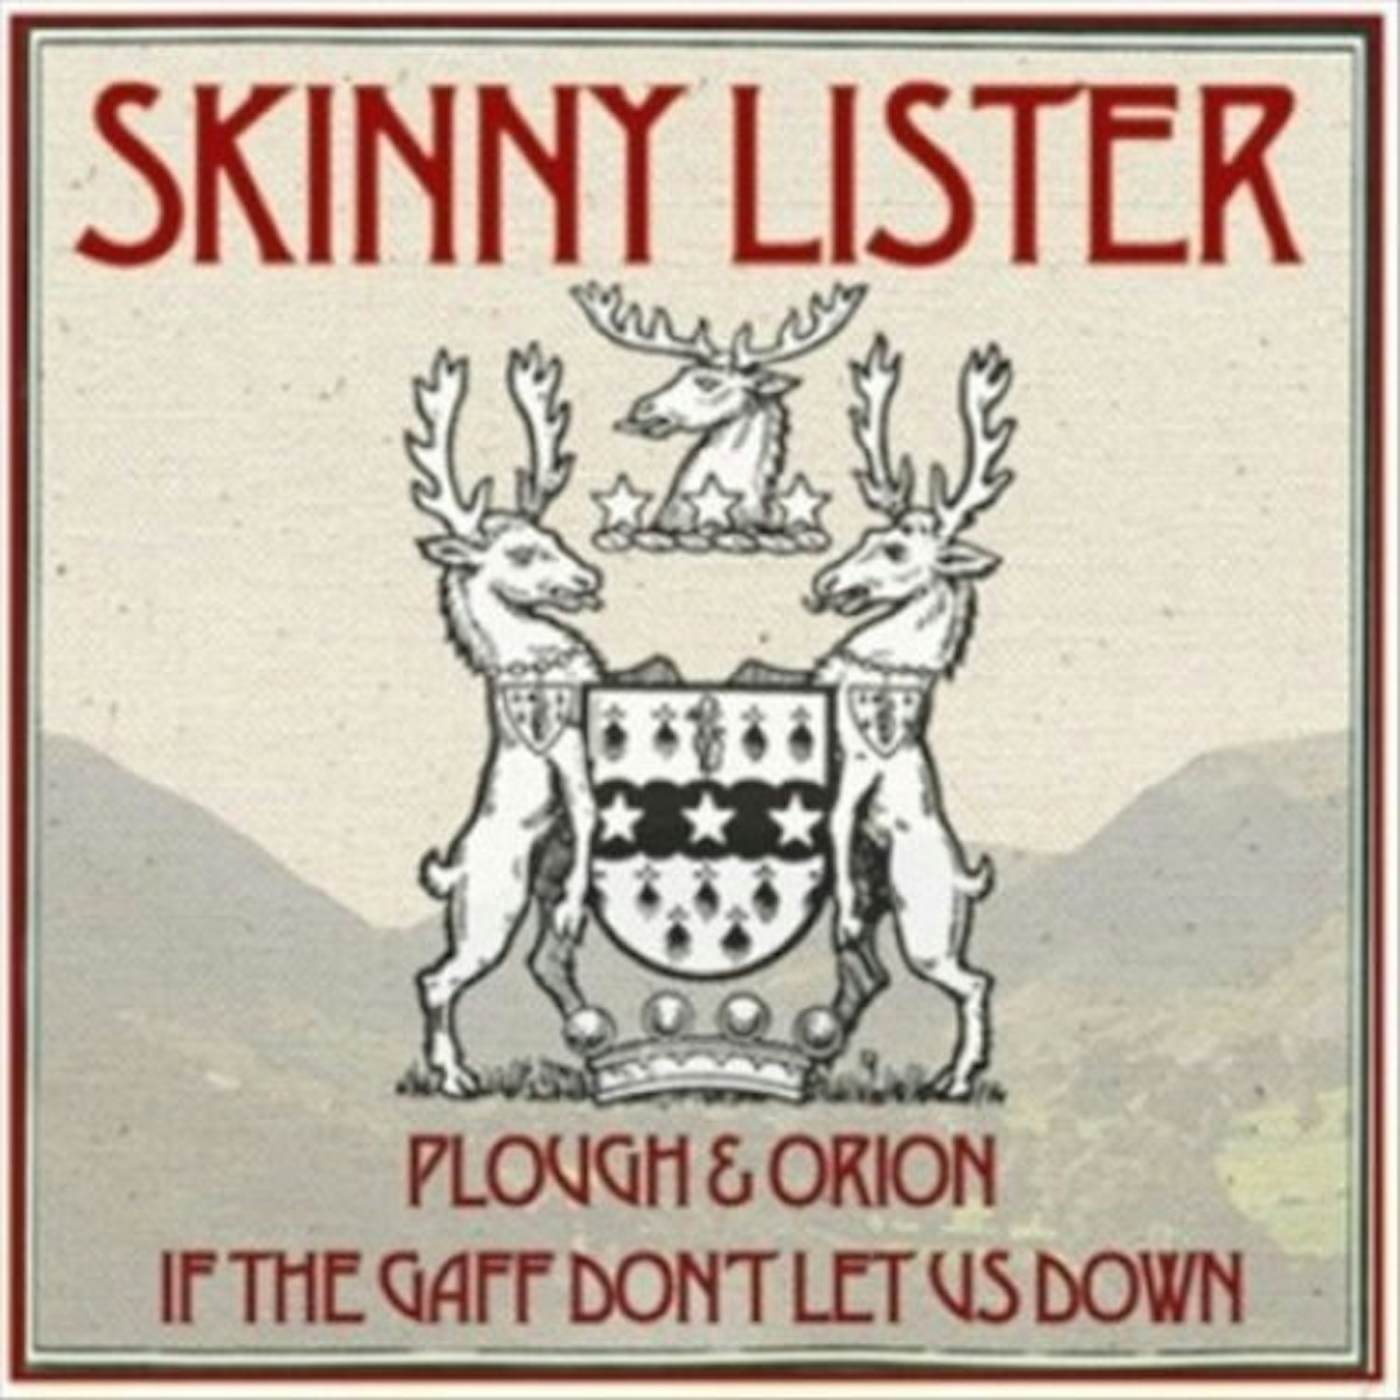 Skinny Lister Plough & Orion / If The Gaff Don't Let Us Down Vinyl Record